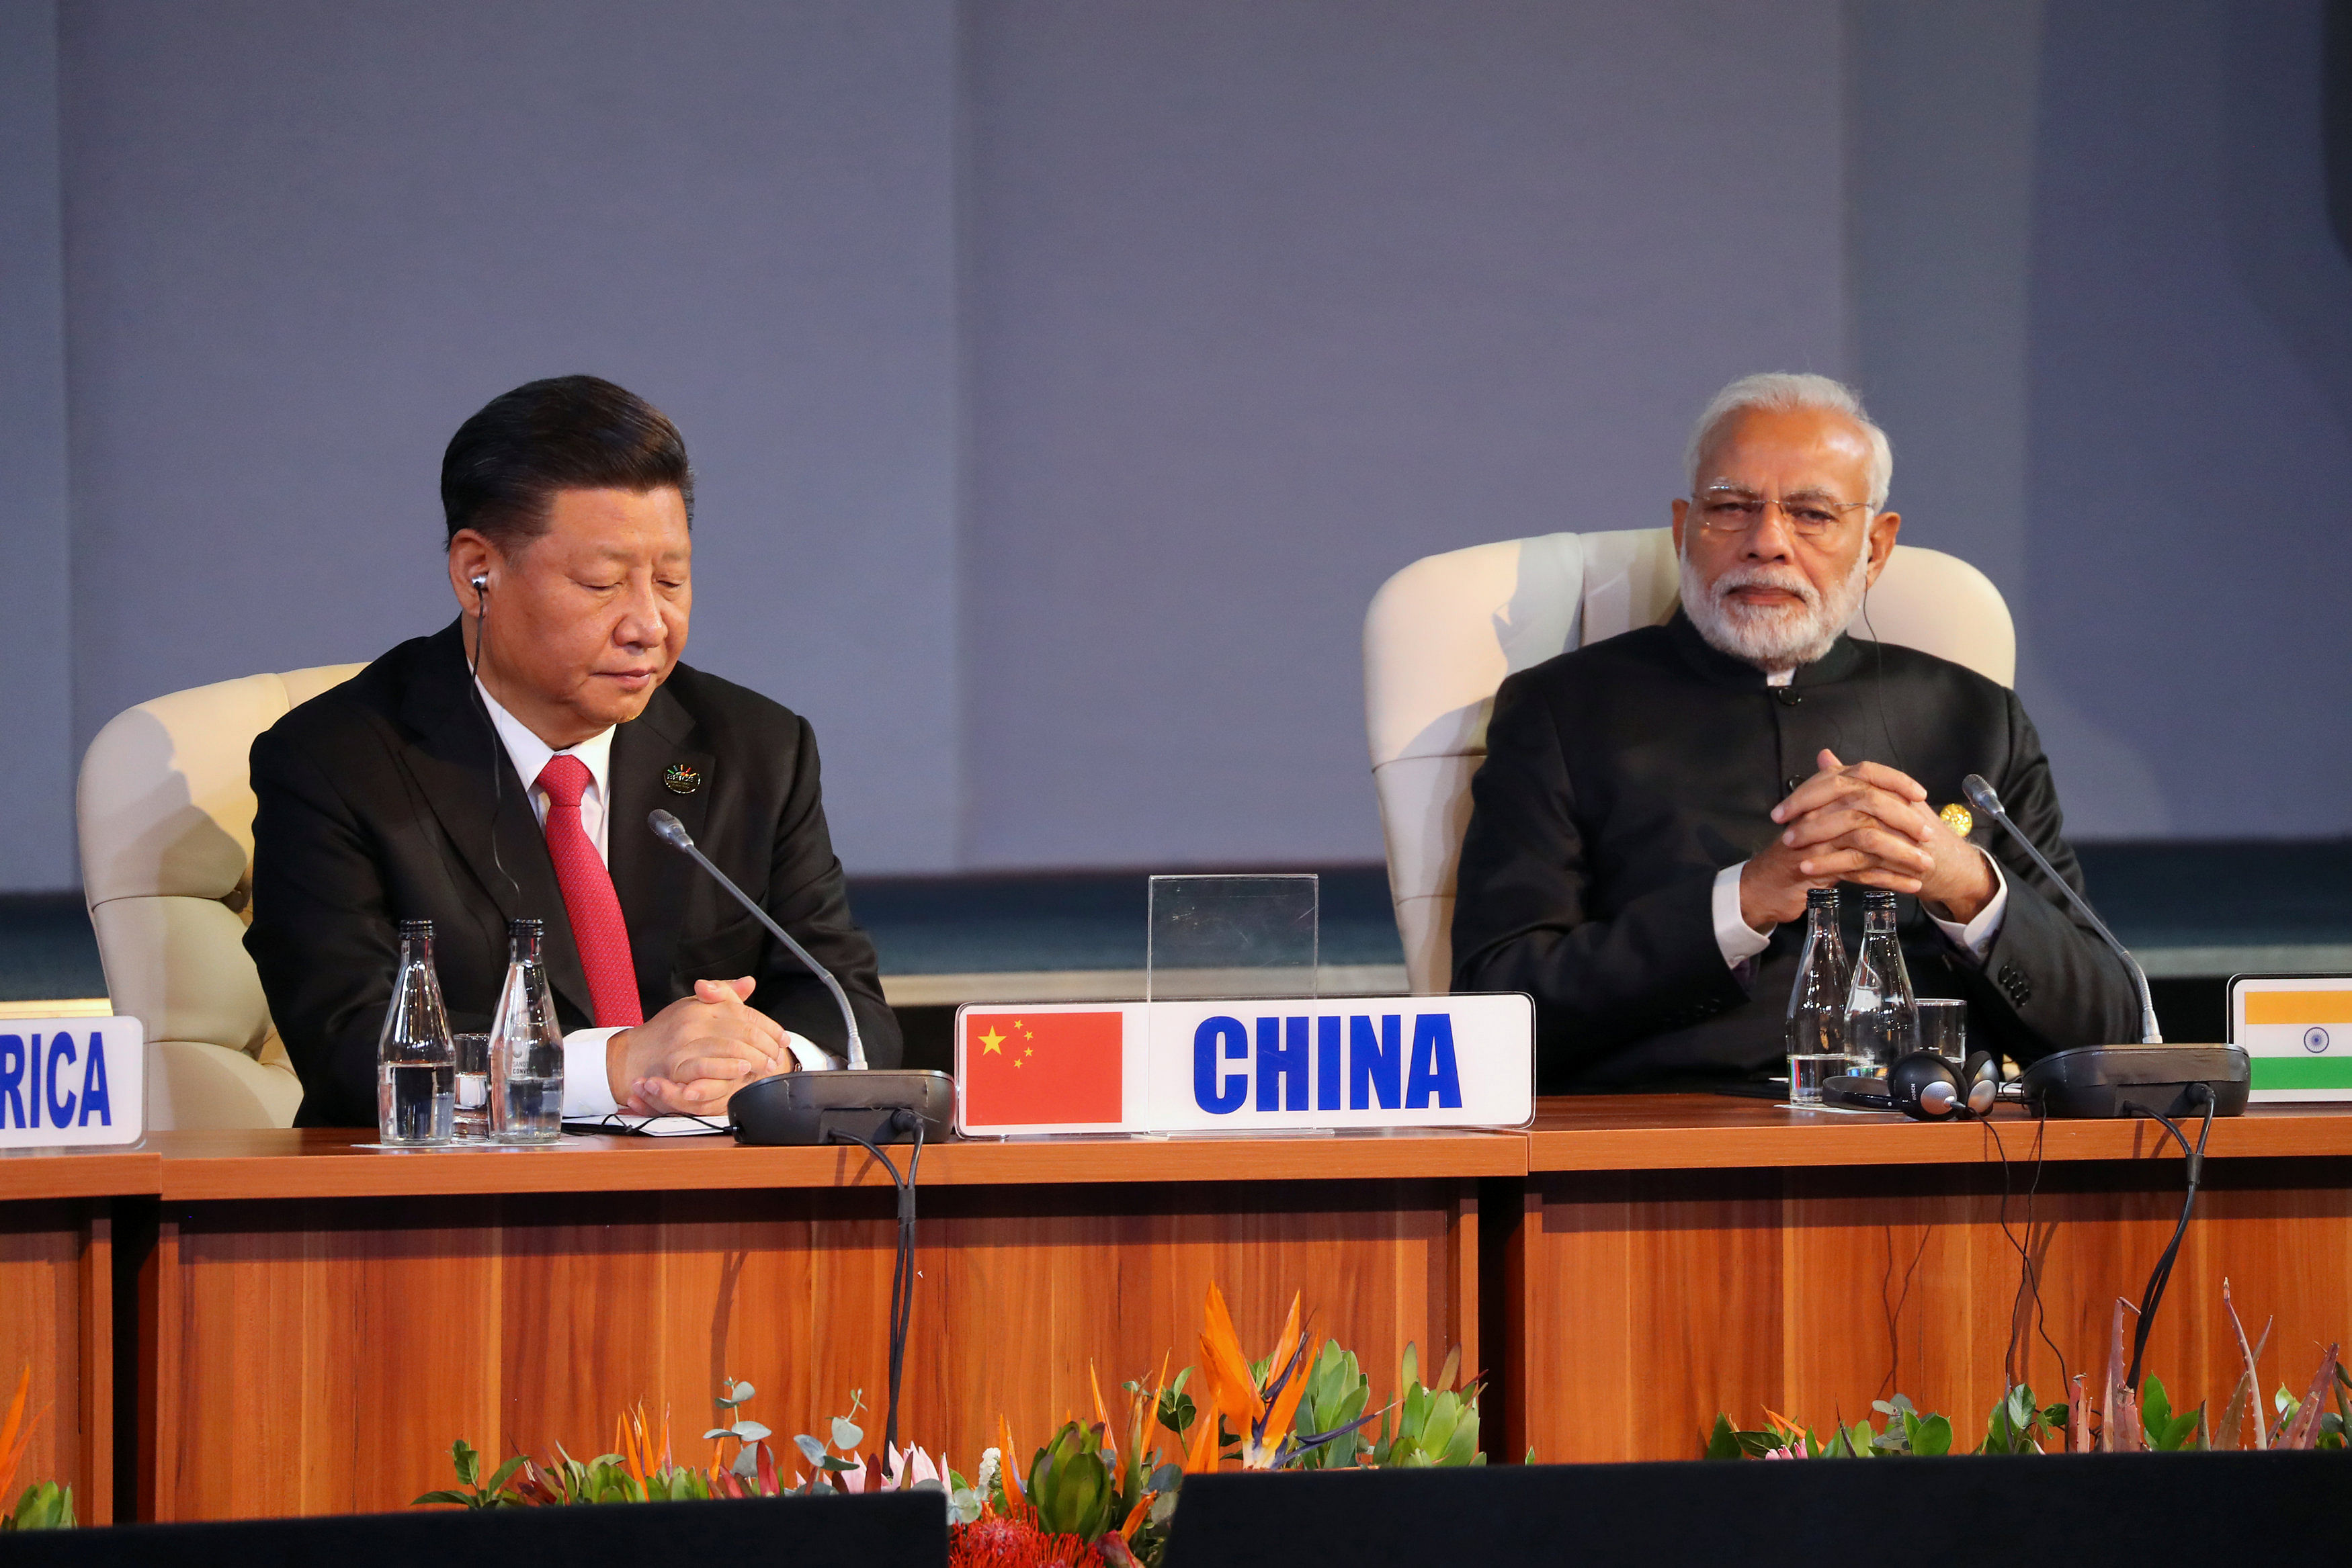 Indian Prime Minister Narendra Modi and China's President Xi Jinping attend the BRICS summit meeting in Johannesburg, South Africa, July 27, 2018. Credit: Reuters/Mike Hutchings